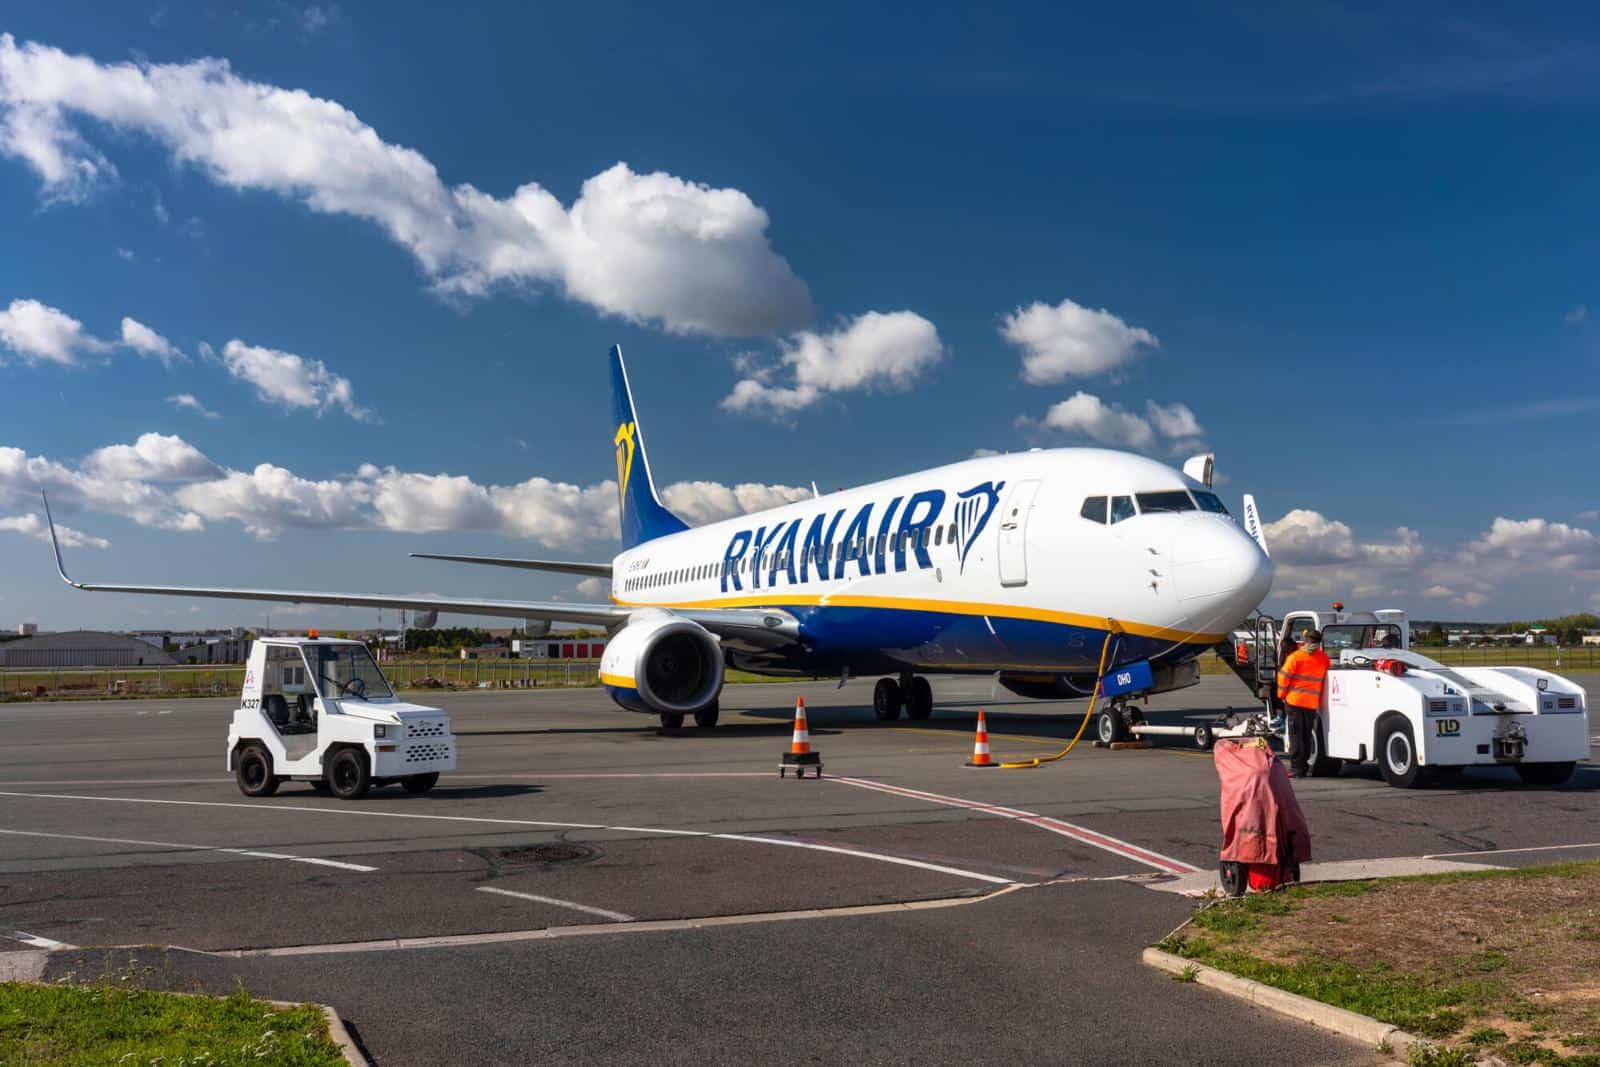 View of Ryanair plane on the tarmac at Beauvais Airport in Paris